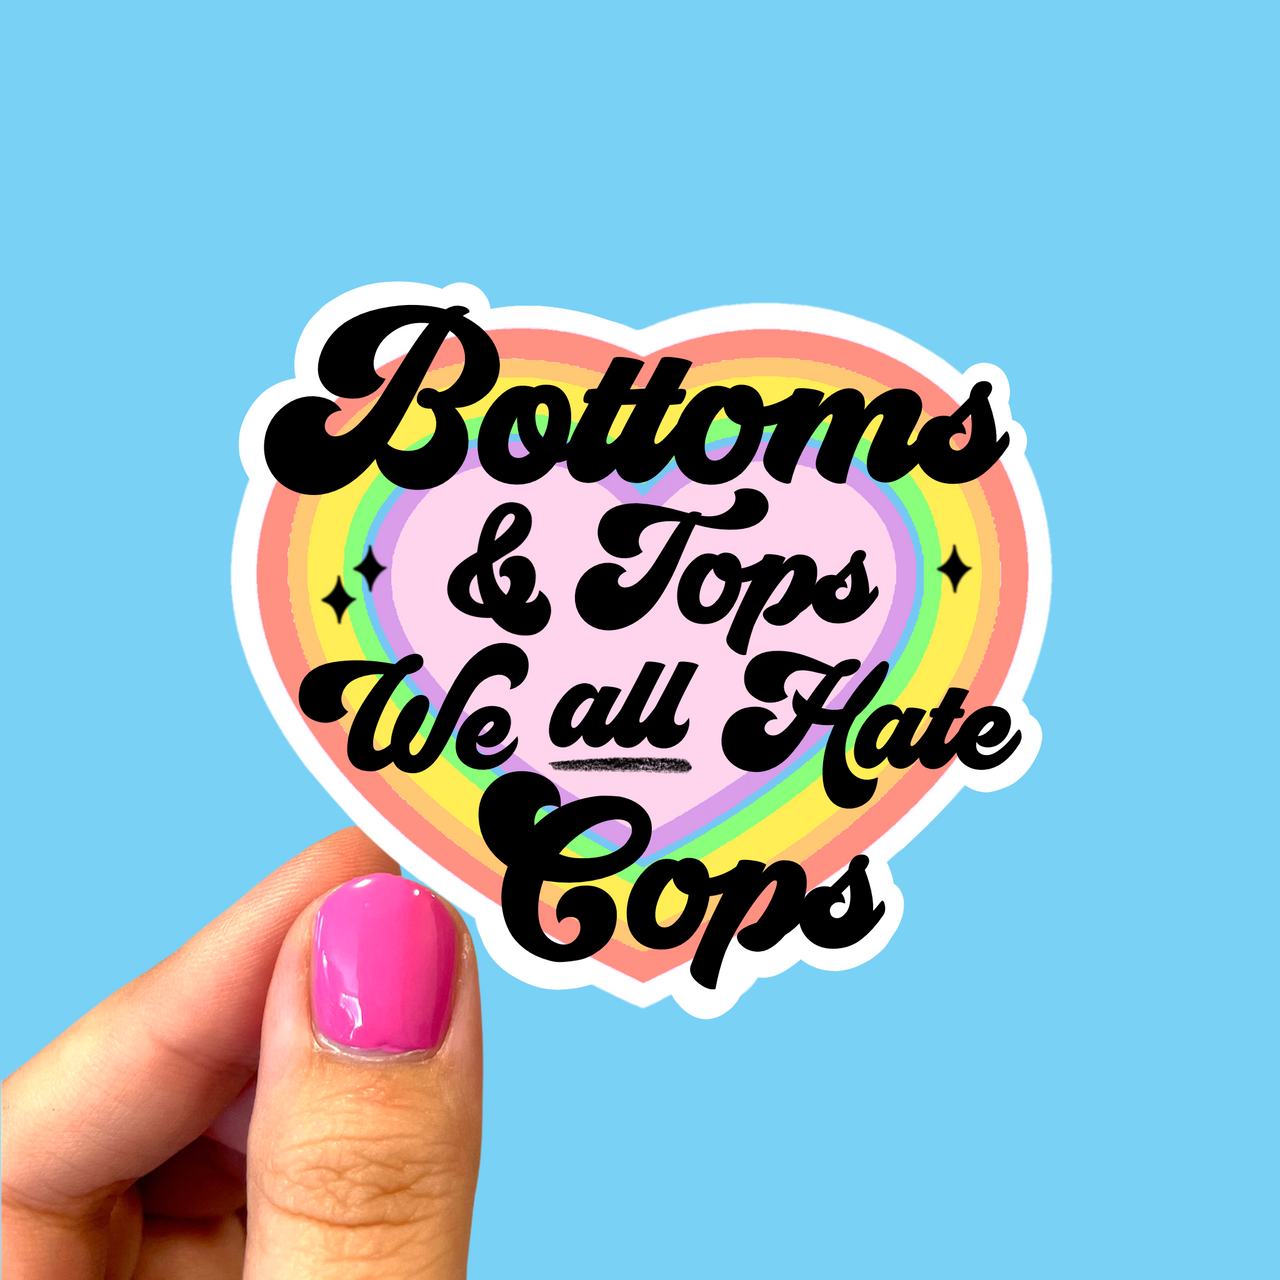 Bottoms and tops we all hate cops